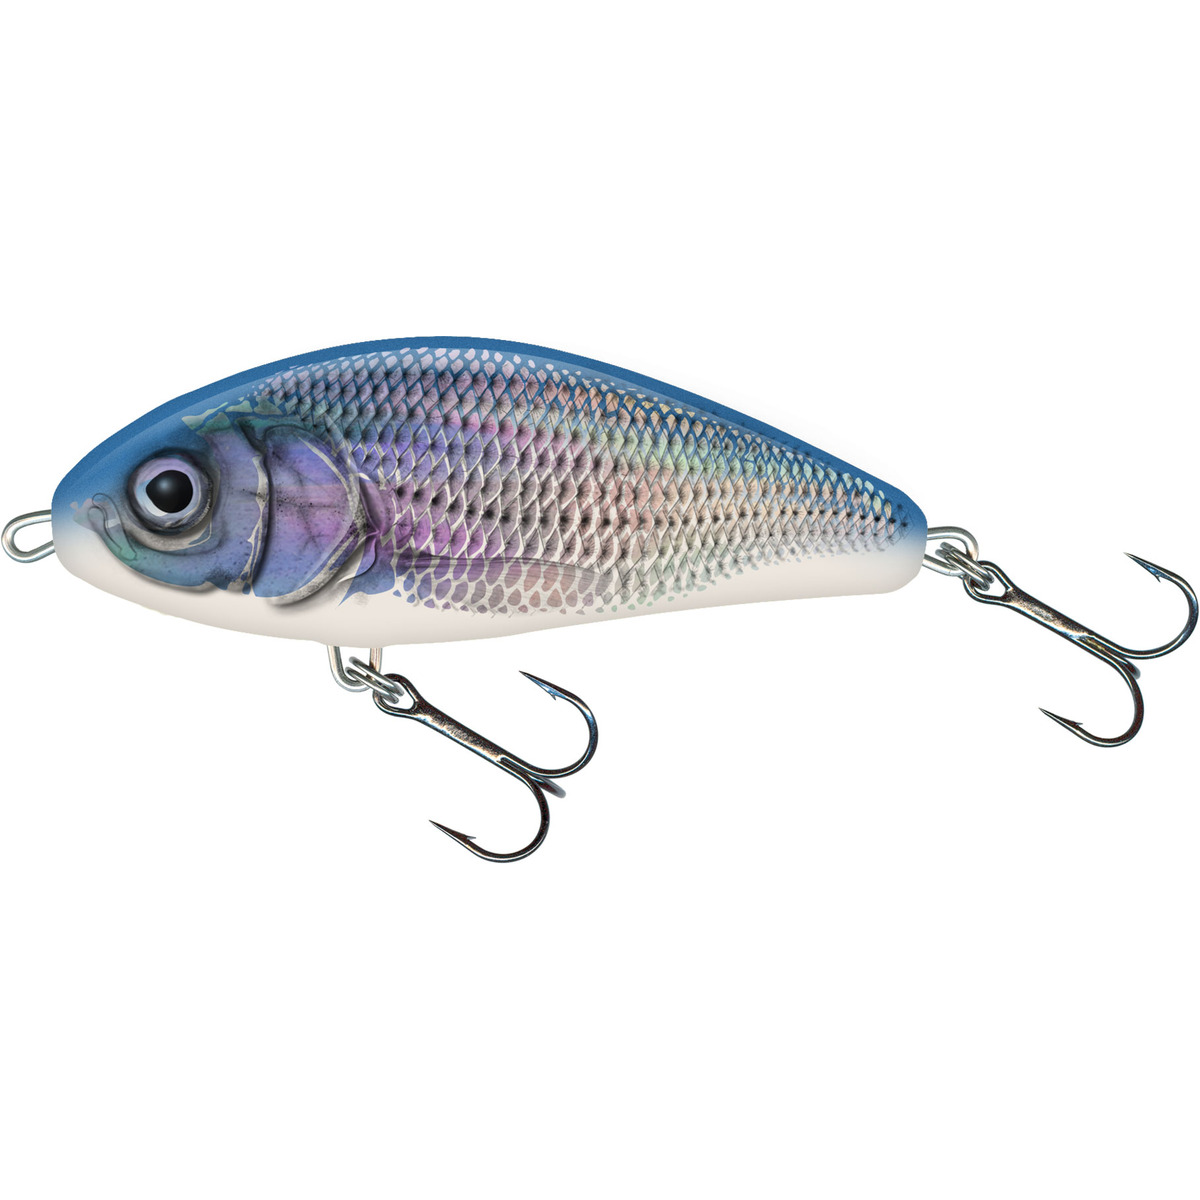 Salmo Fatso 14 Cm Floating Limited Edition Colours - Blue Fingerling